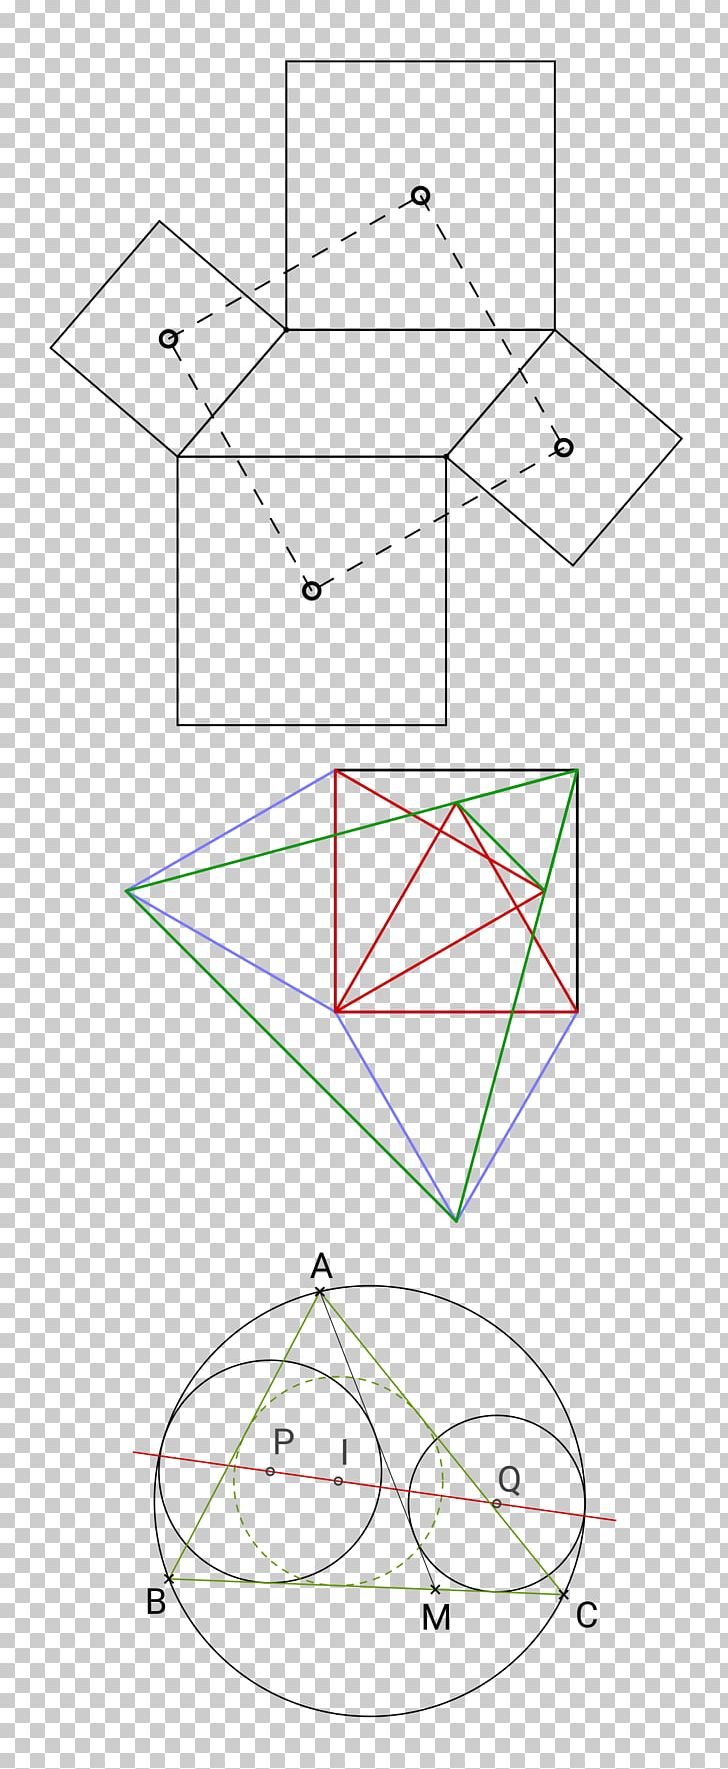 Van Aubel's Theorem Geometry Quadrilateral Japanese Theorem For Cyclic Polygons PNG, Clipart,  Free PNG Download